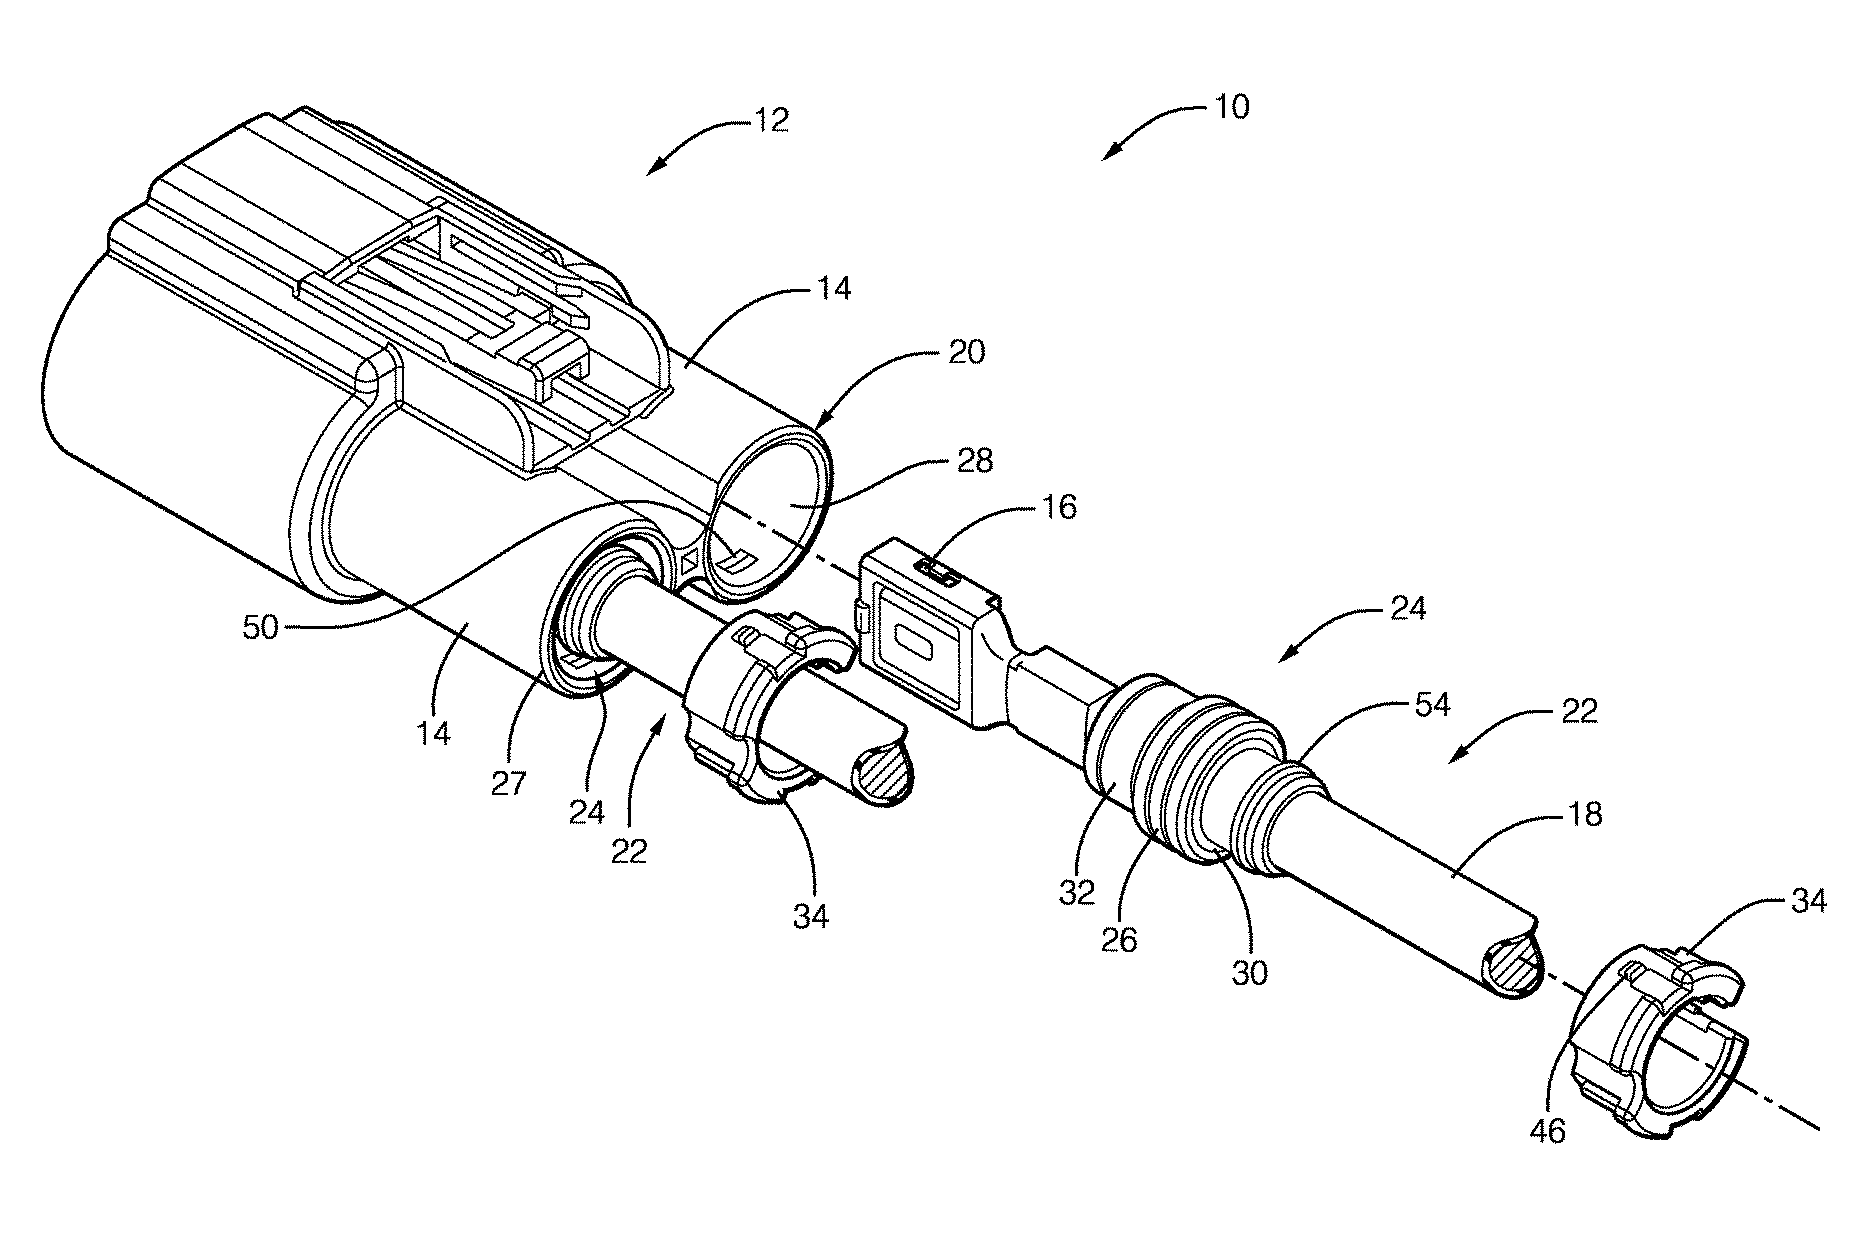 Sealed connector with an extended seal sleeve and an anti-water pooling retainer